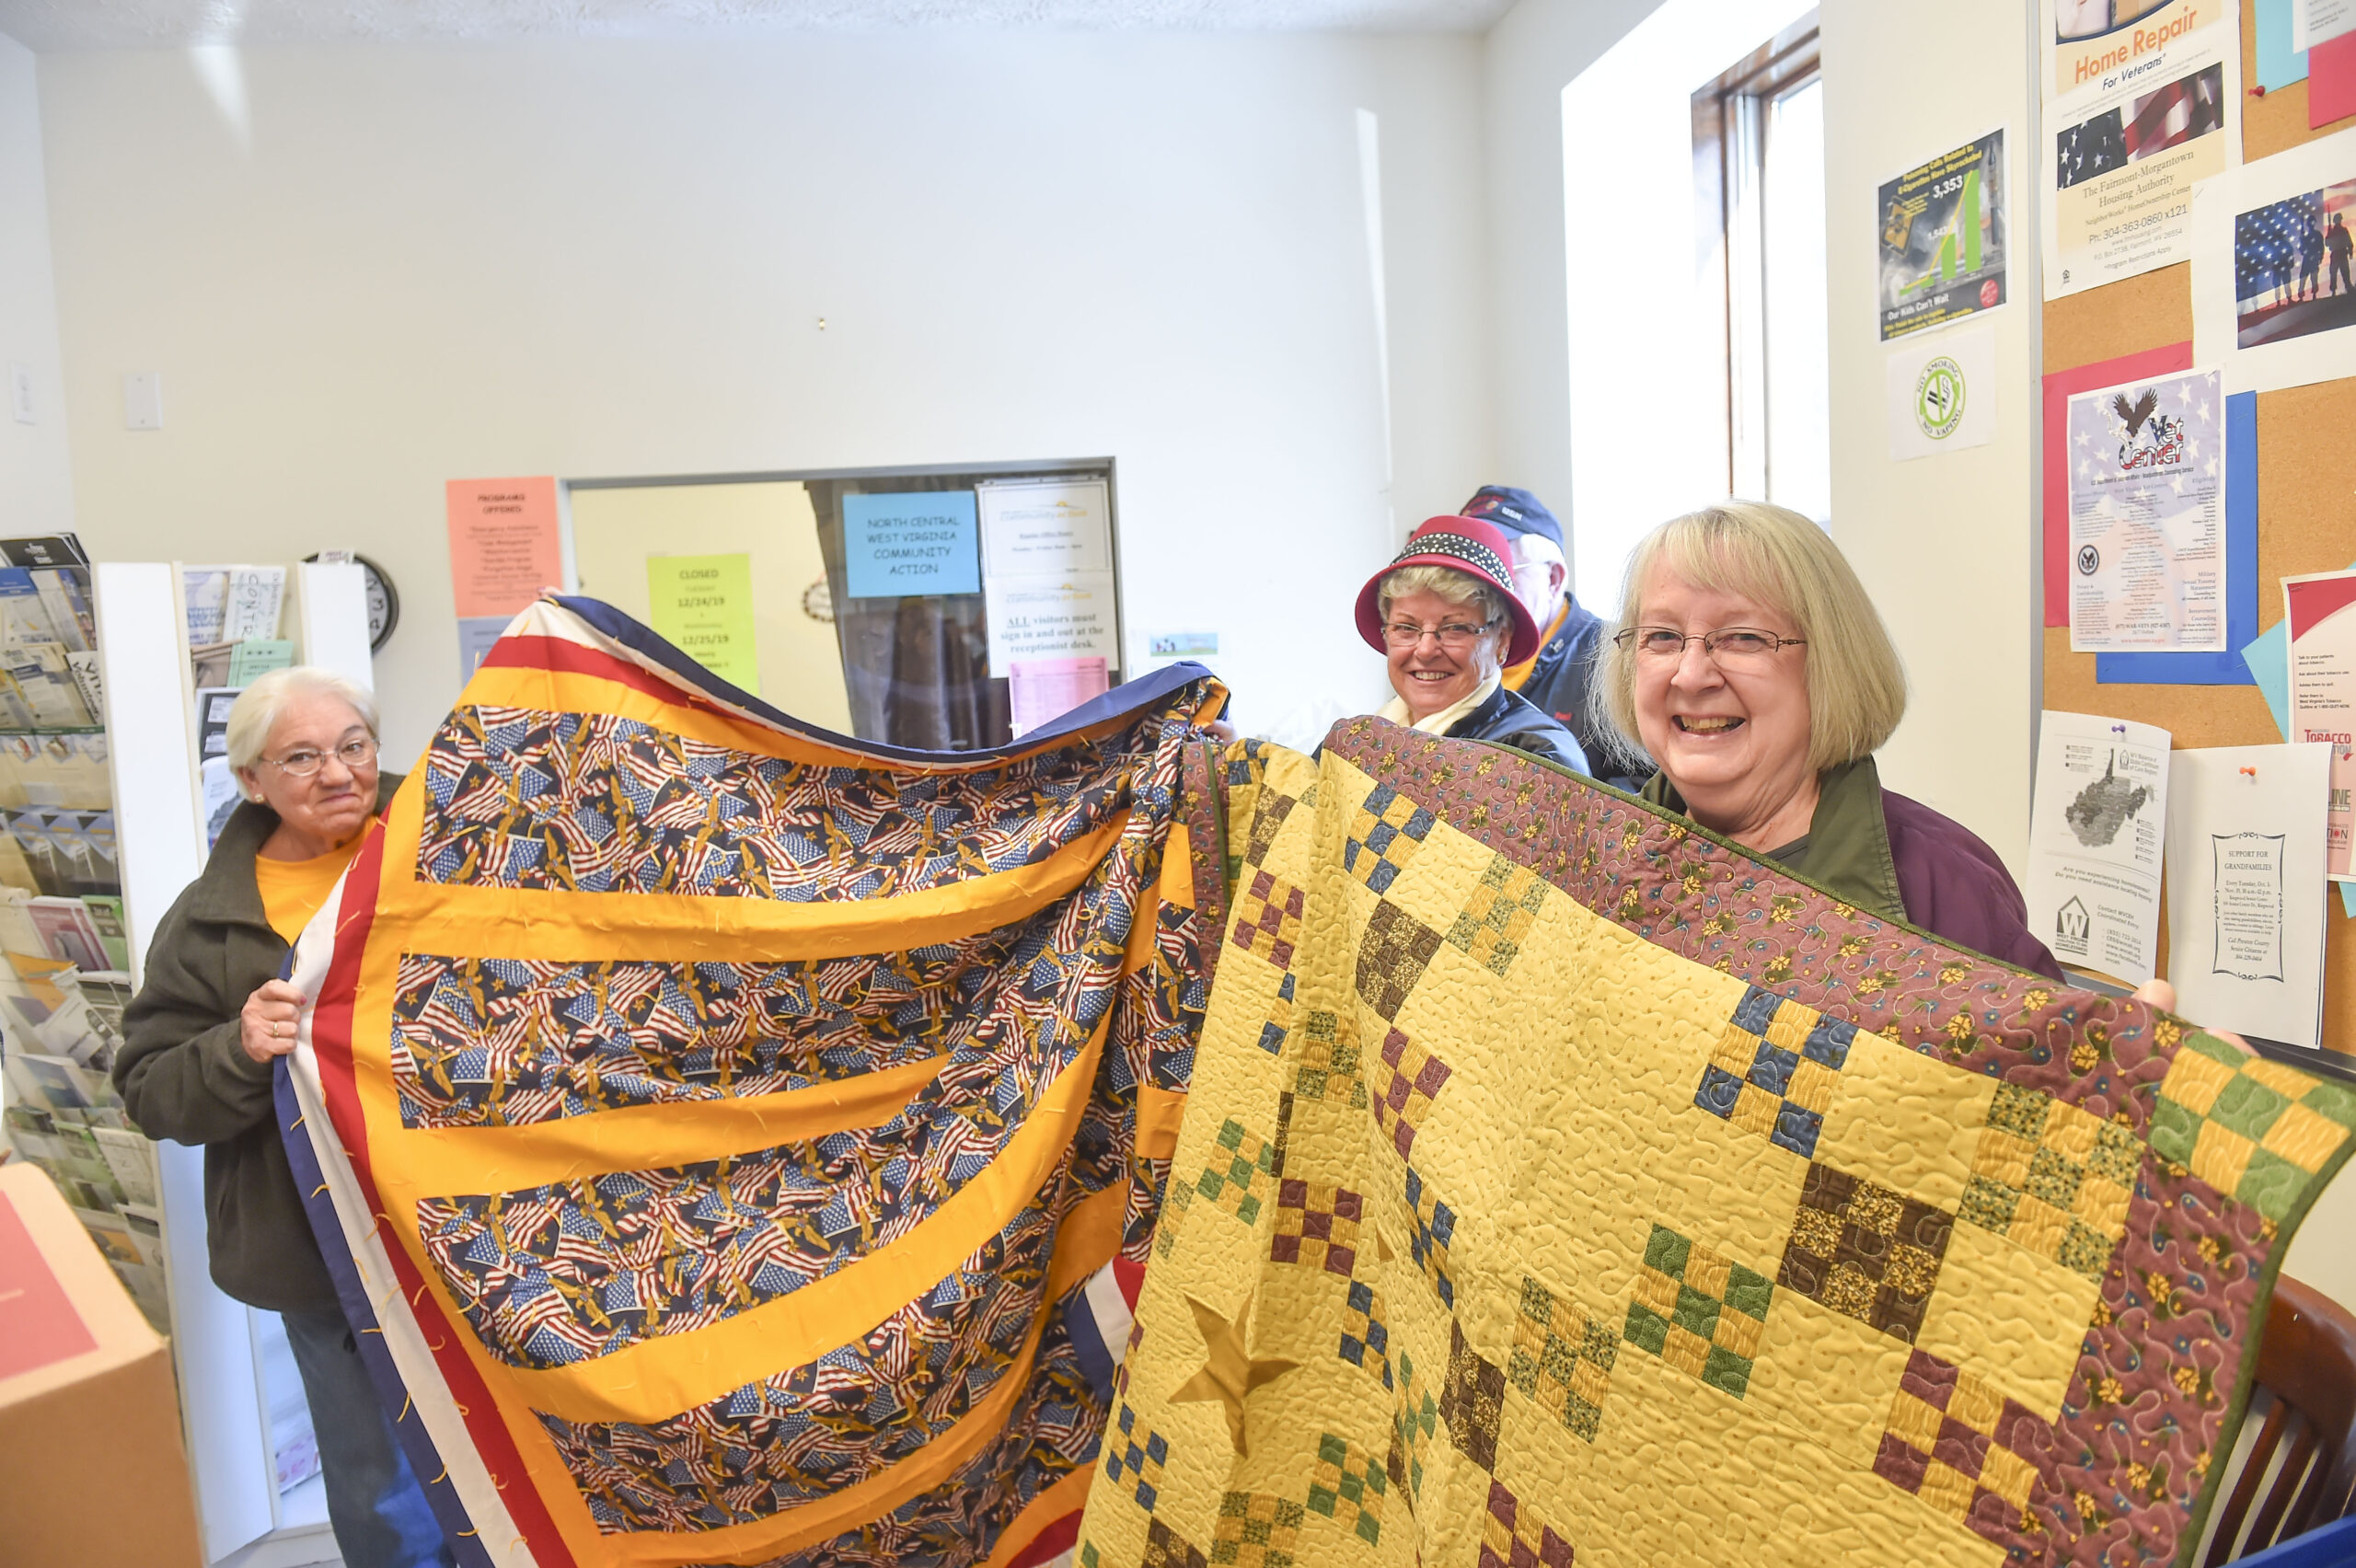 Allinda Maxon, Peggy Savage and Carolyn Miller shows the quilts that were donated to Community Action on Wednesday.